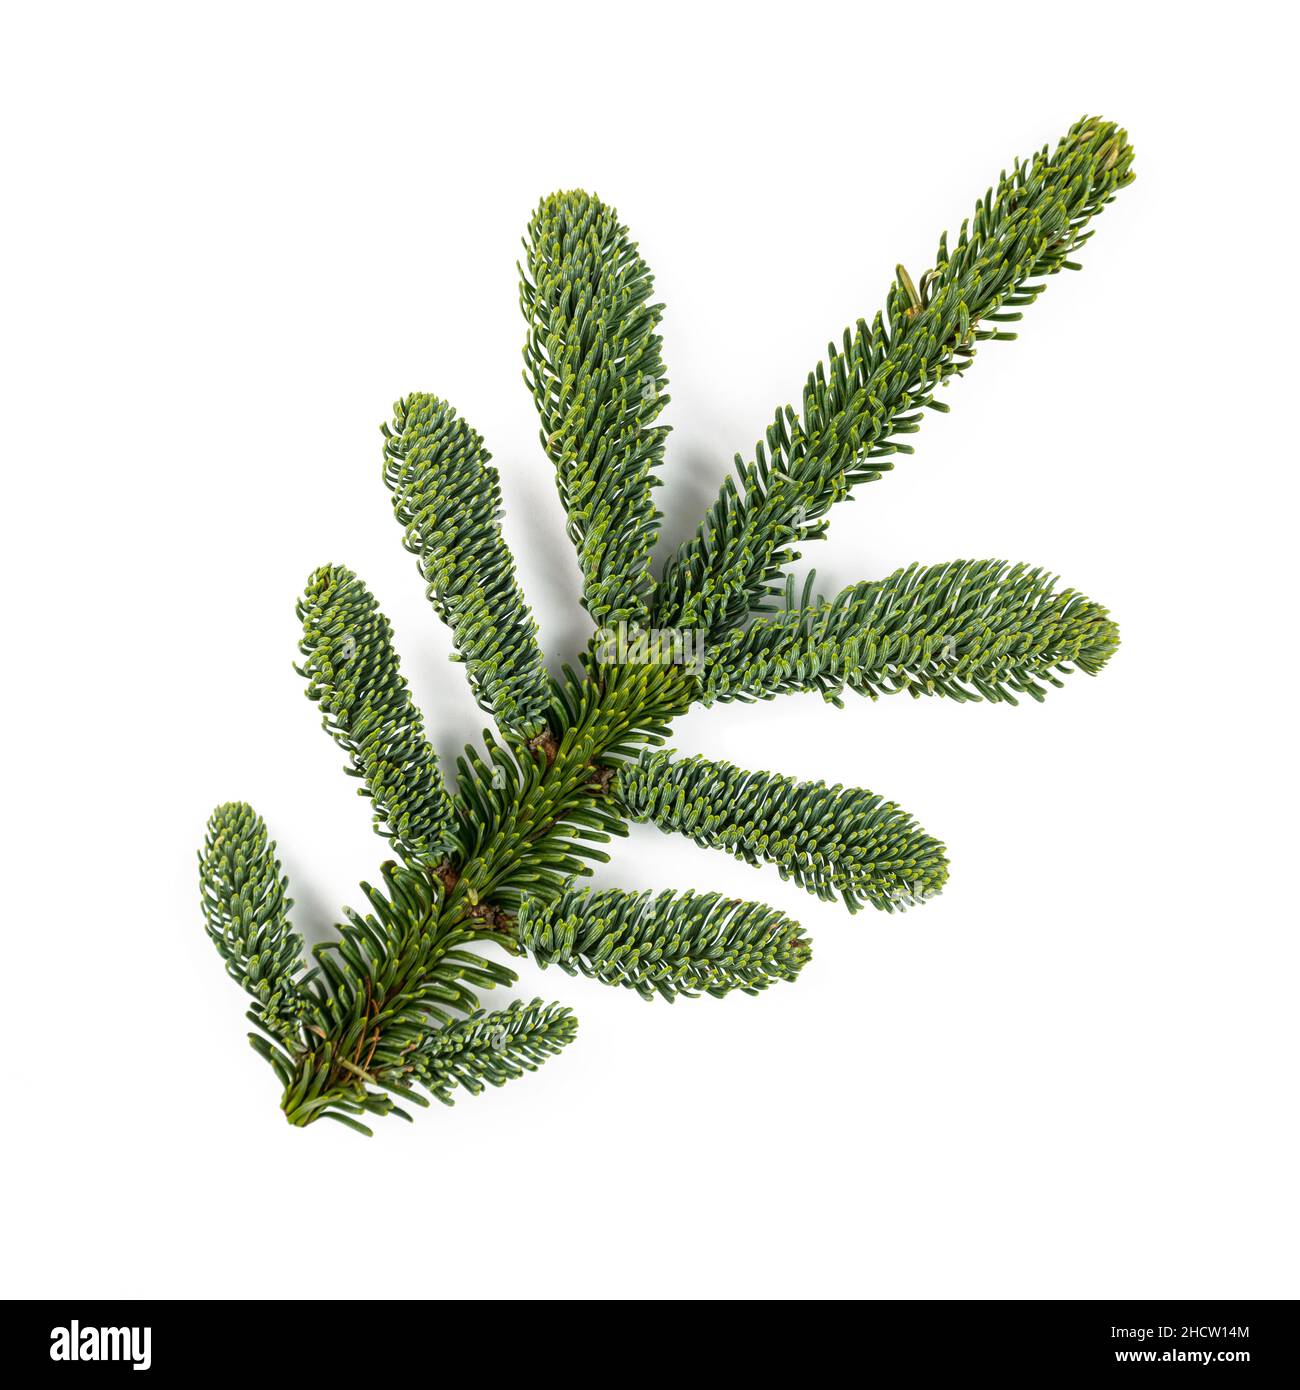 Amazing Nobilis fir branch for decoration, isolated on white Stock Photo